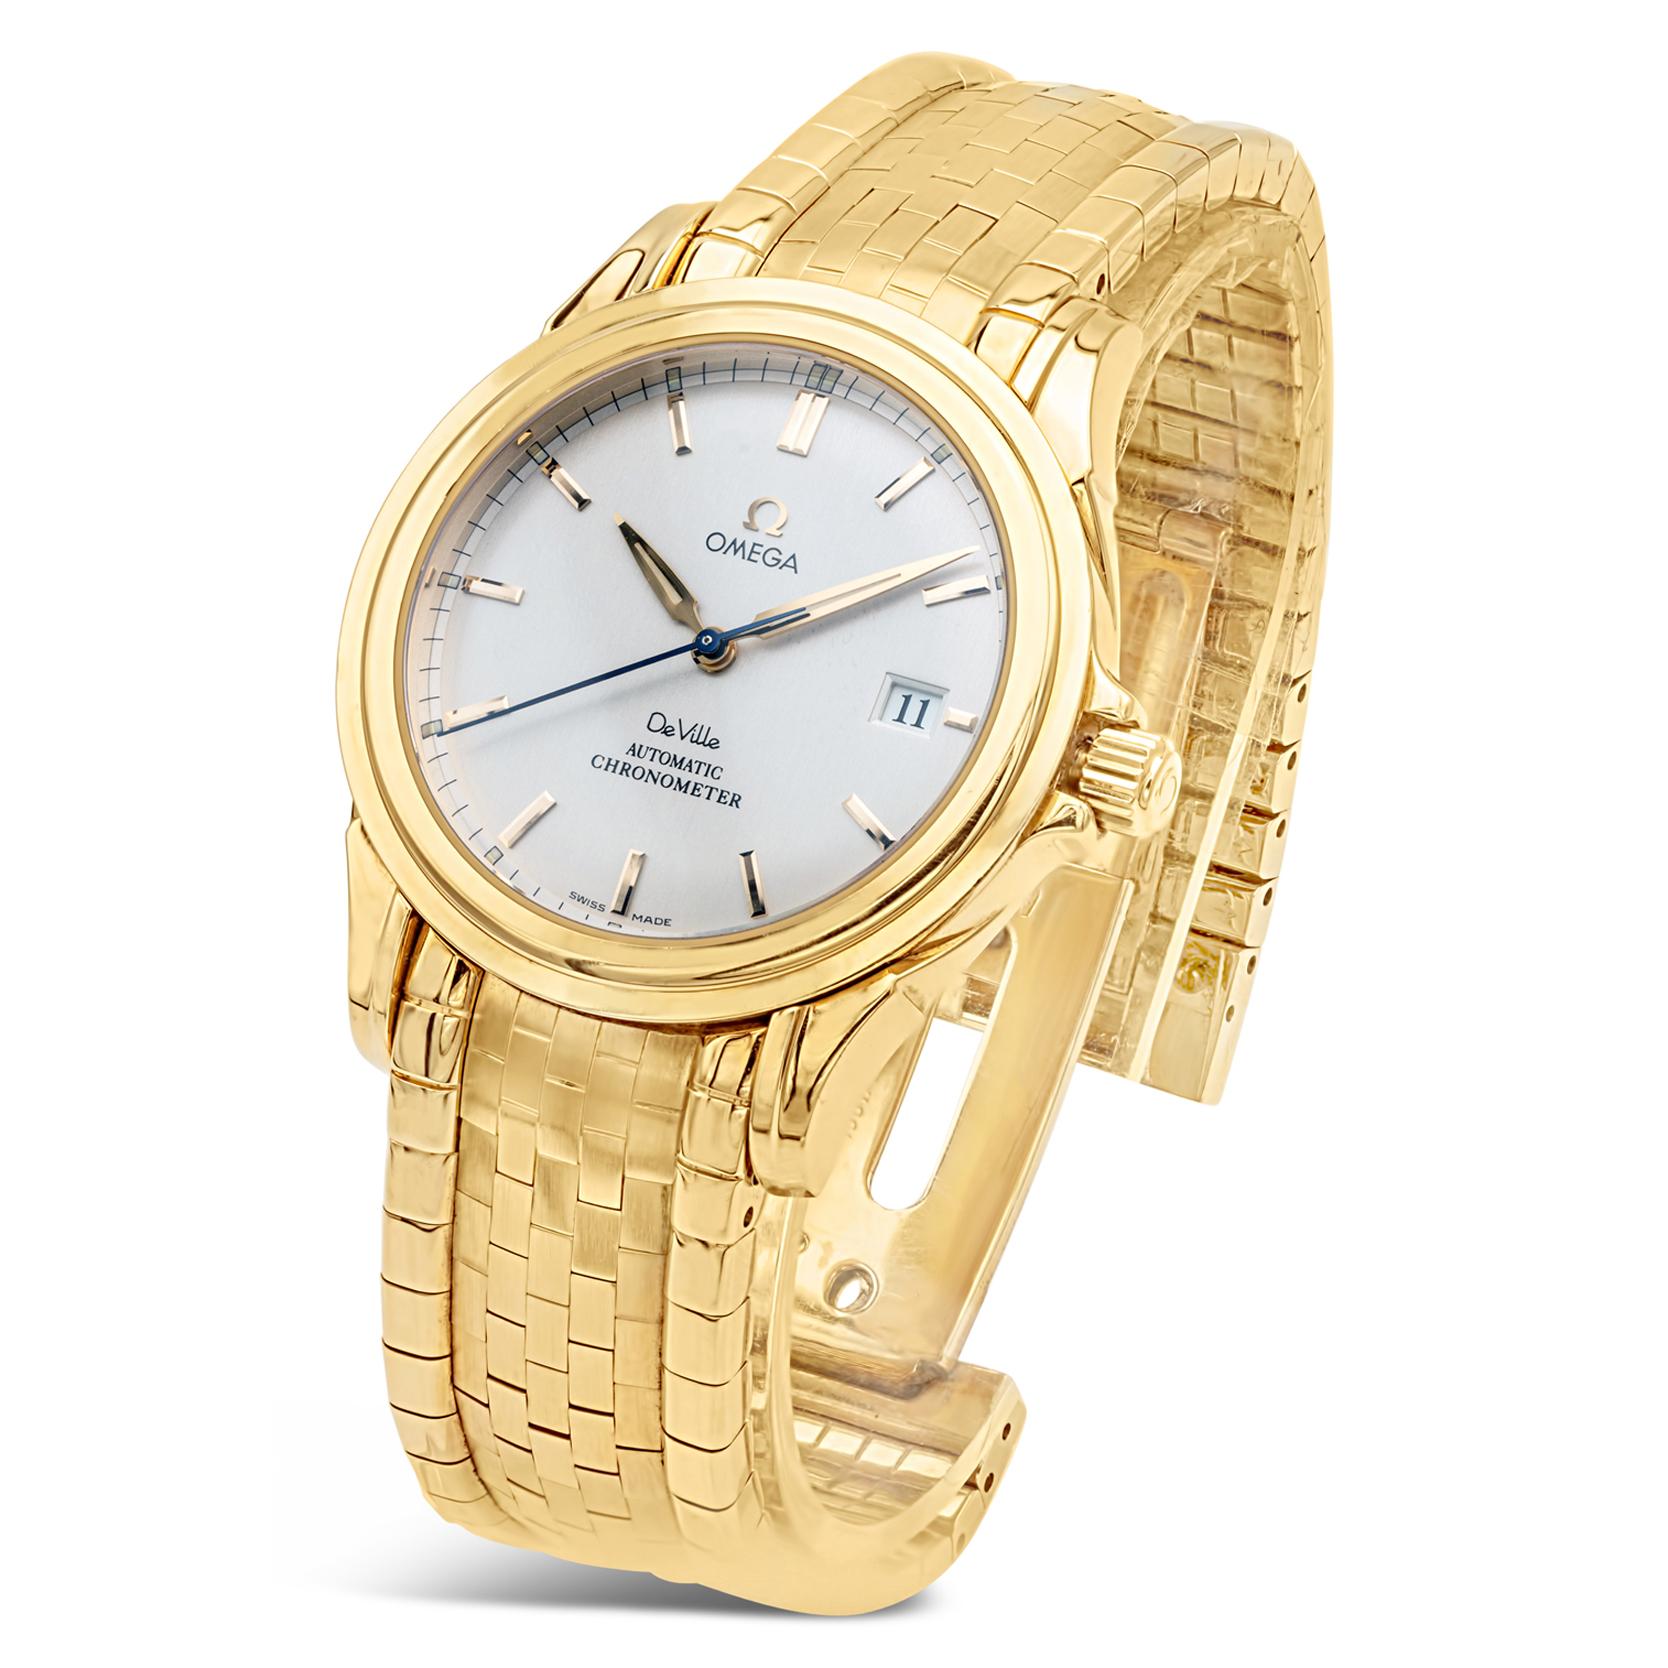 Type: Rare Omega De Ville 18K Yellow Gold Co-Axial Automatic Chronometer, Full Set, Ref. 413.30.00, Circa 2001
Signed: Omega on dial, case, crown, movement, and deployment clasp
Model: De Ville 
Dial: brushed silver, with sunken outer minute track,